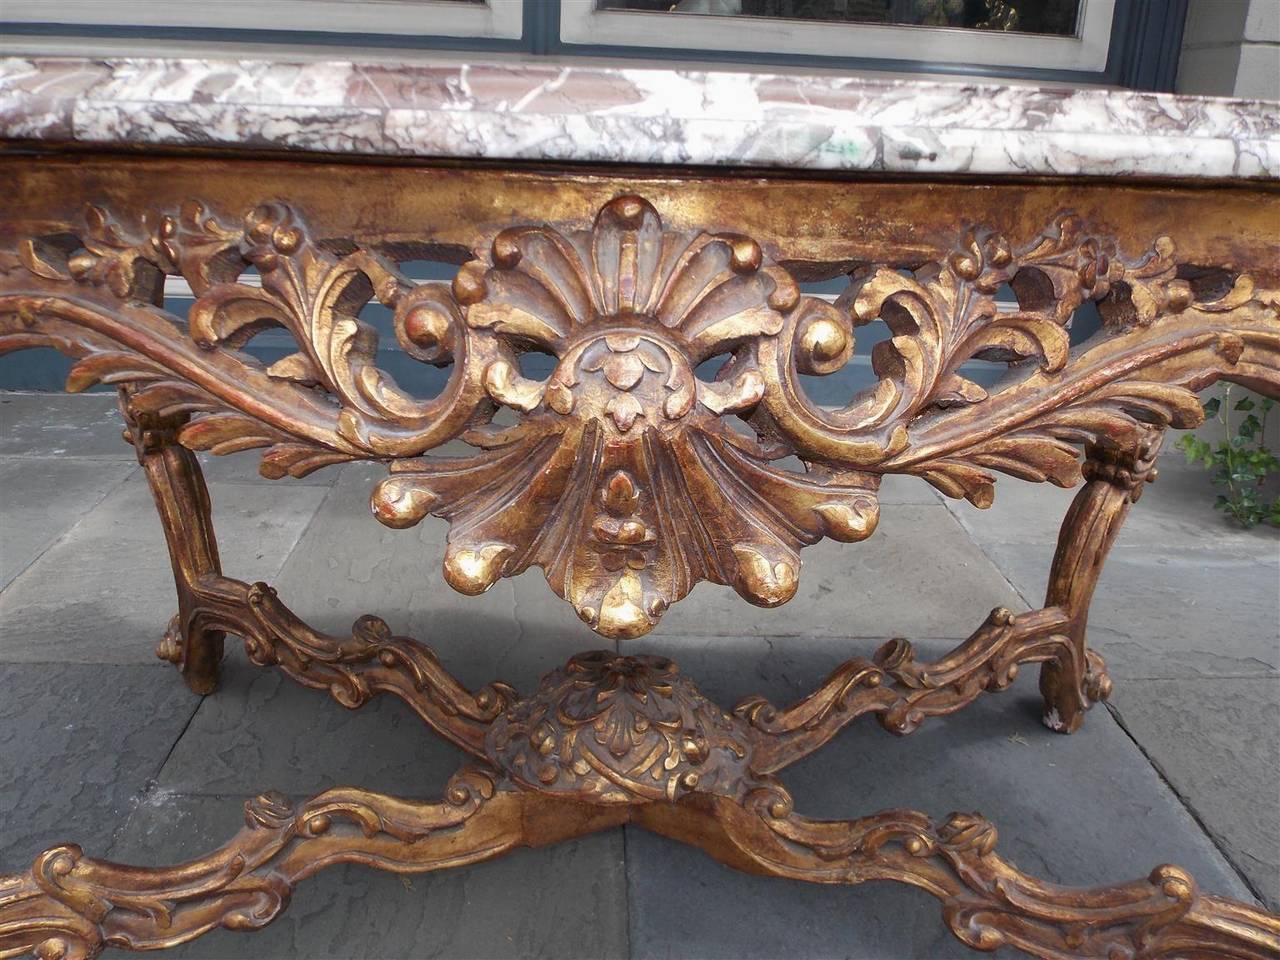 French Serpentine Marble-Top and Gilt Floral Center Table, Circa 1770 For Sale 3